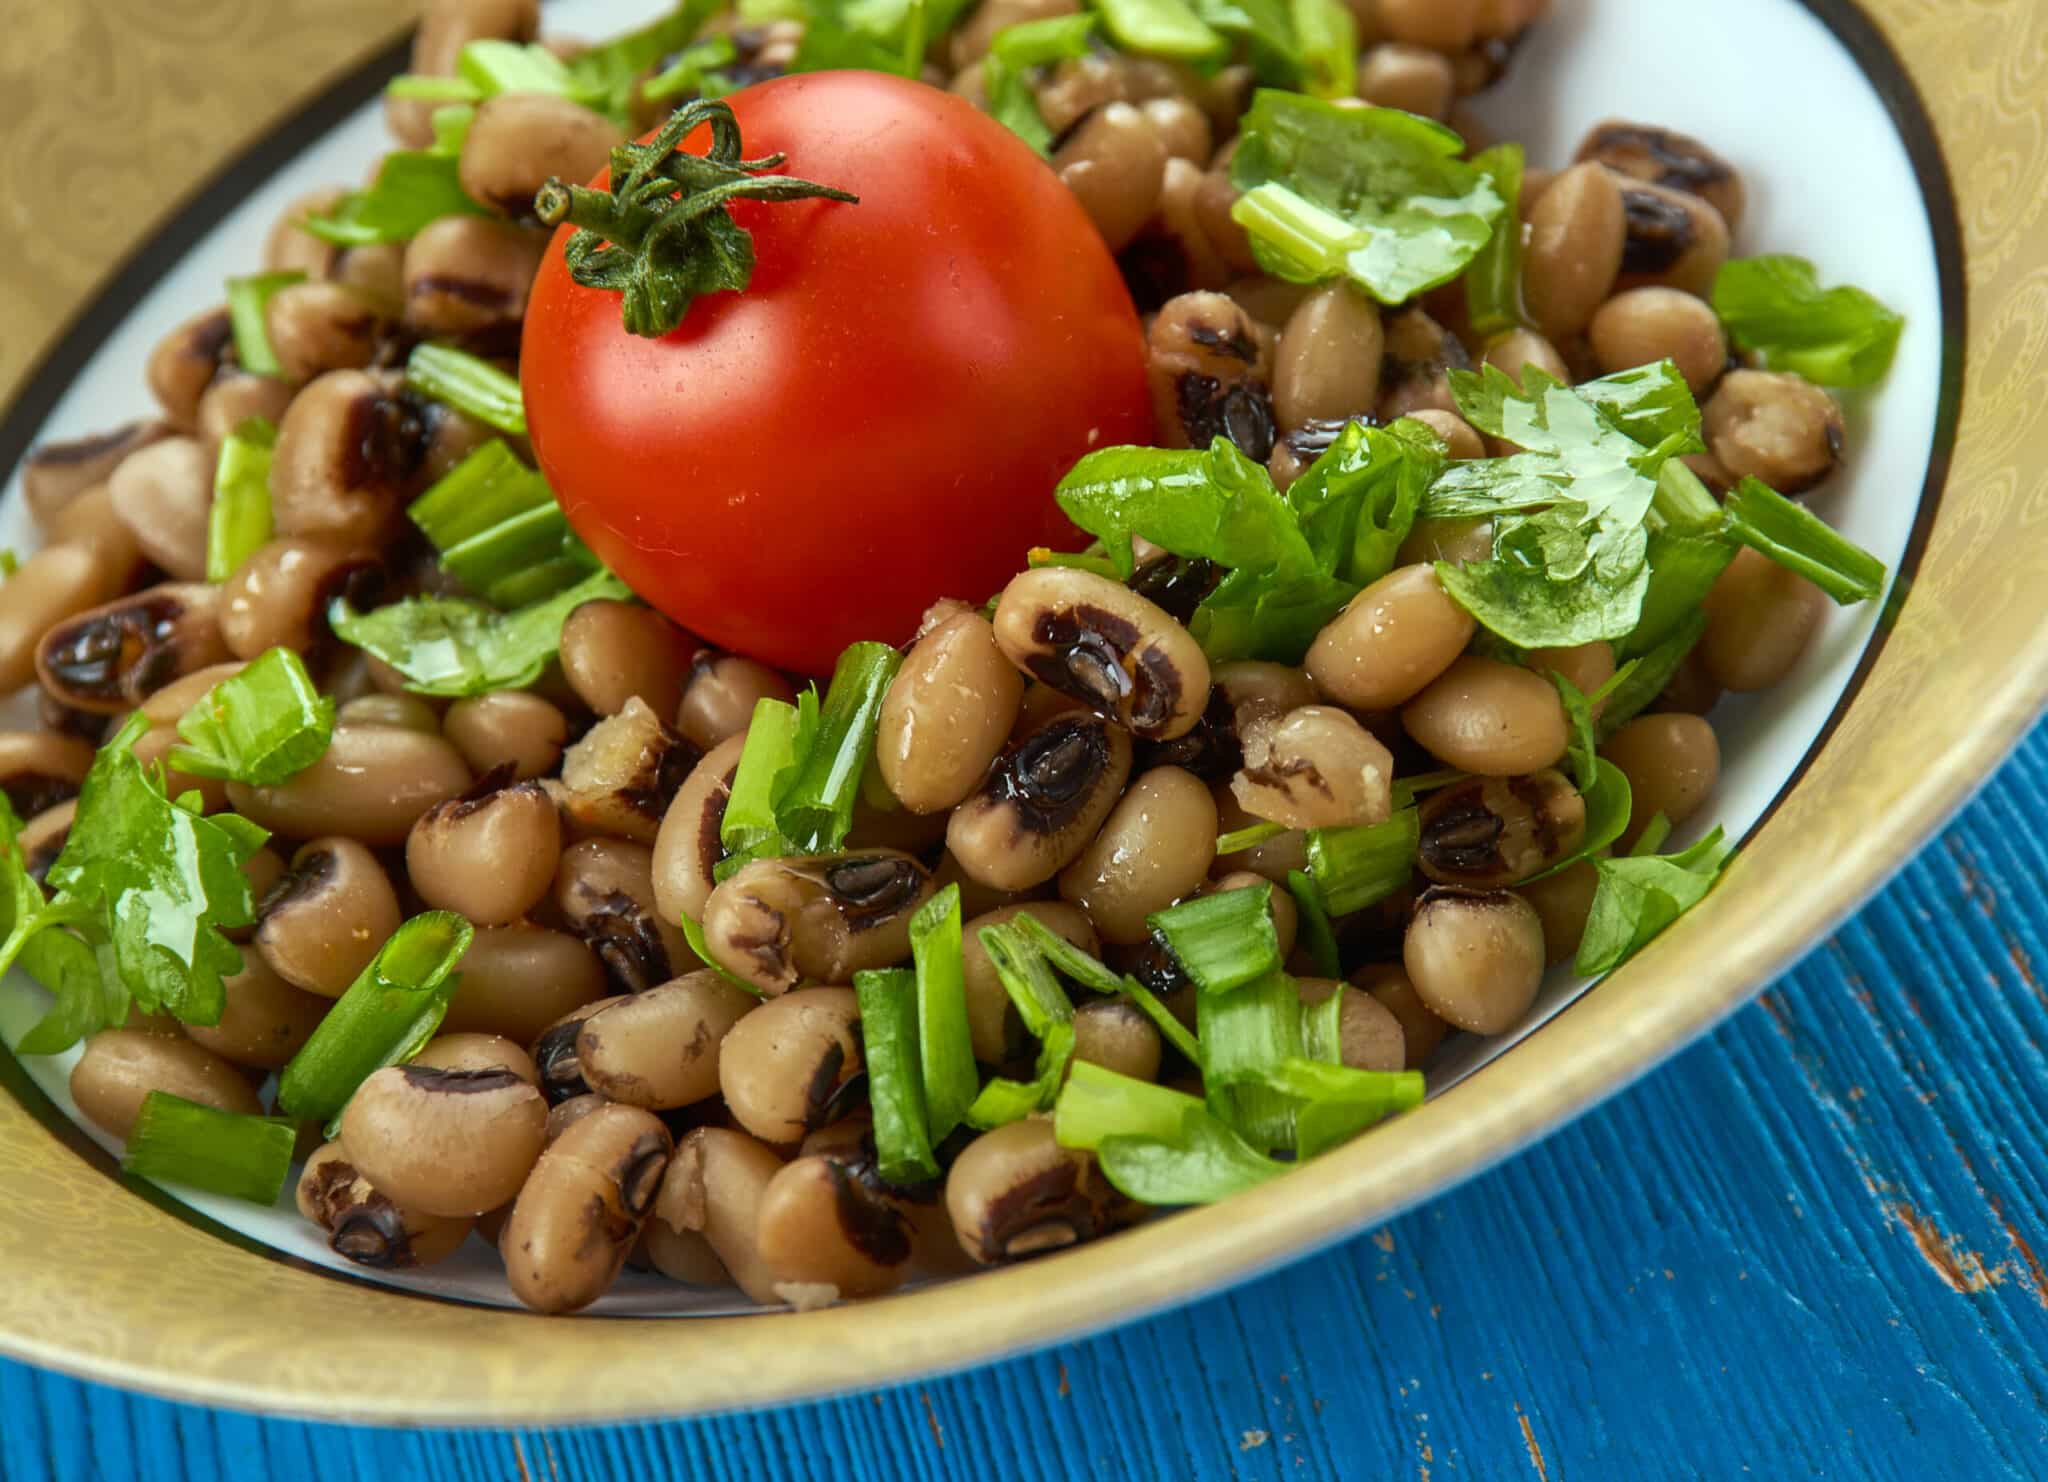 How Long To Cook Black-Eyed Peas